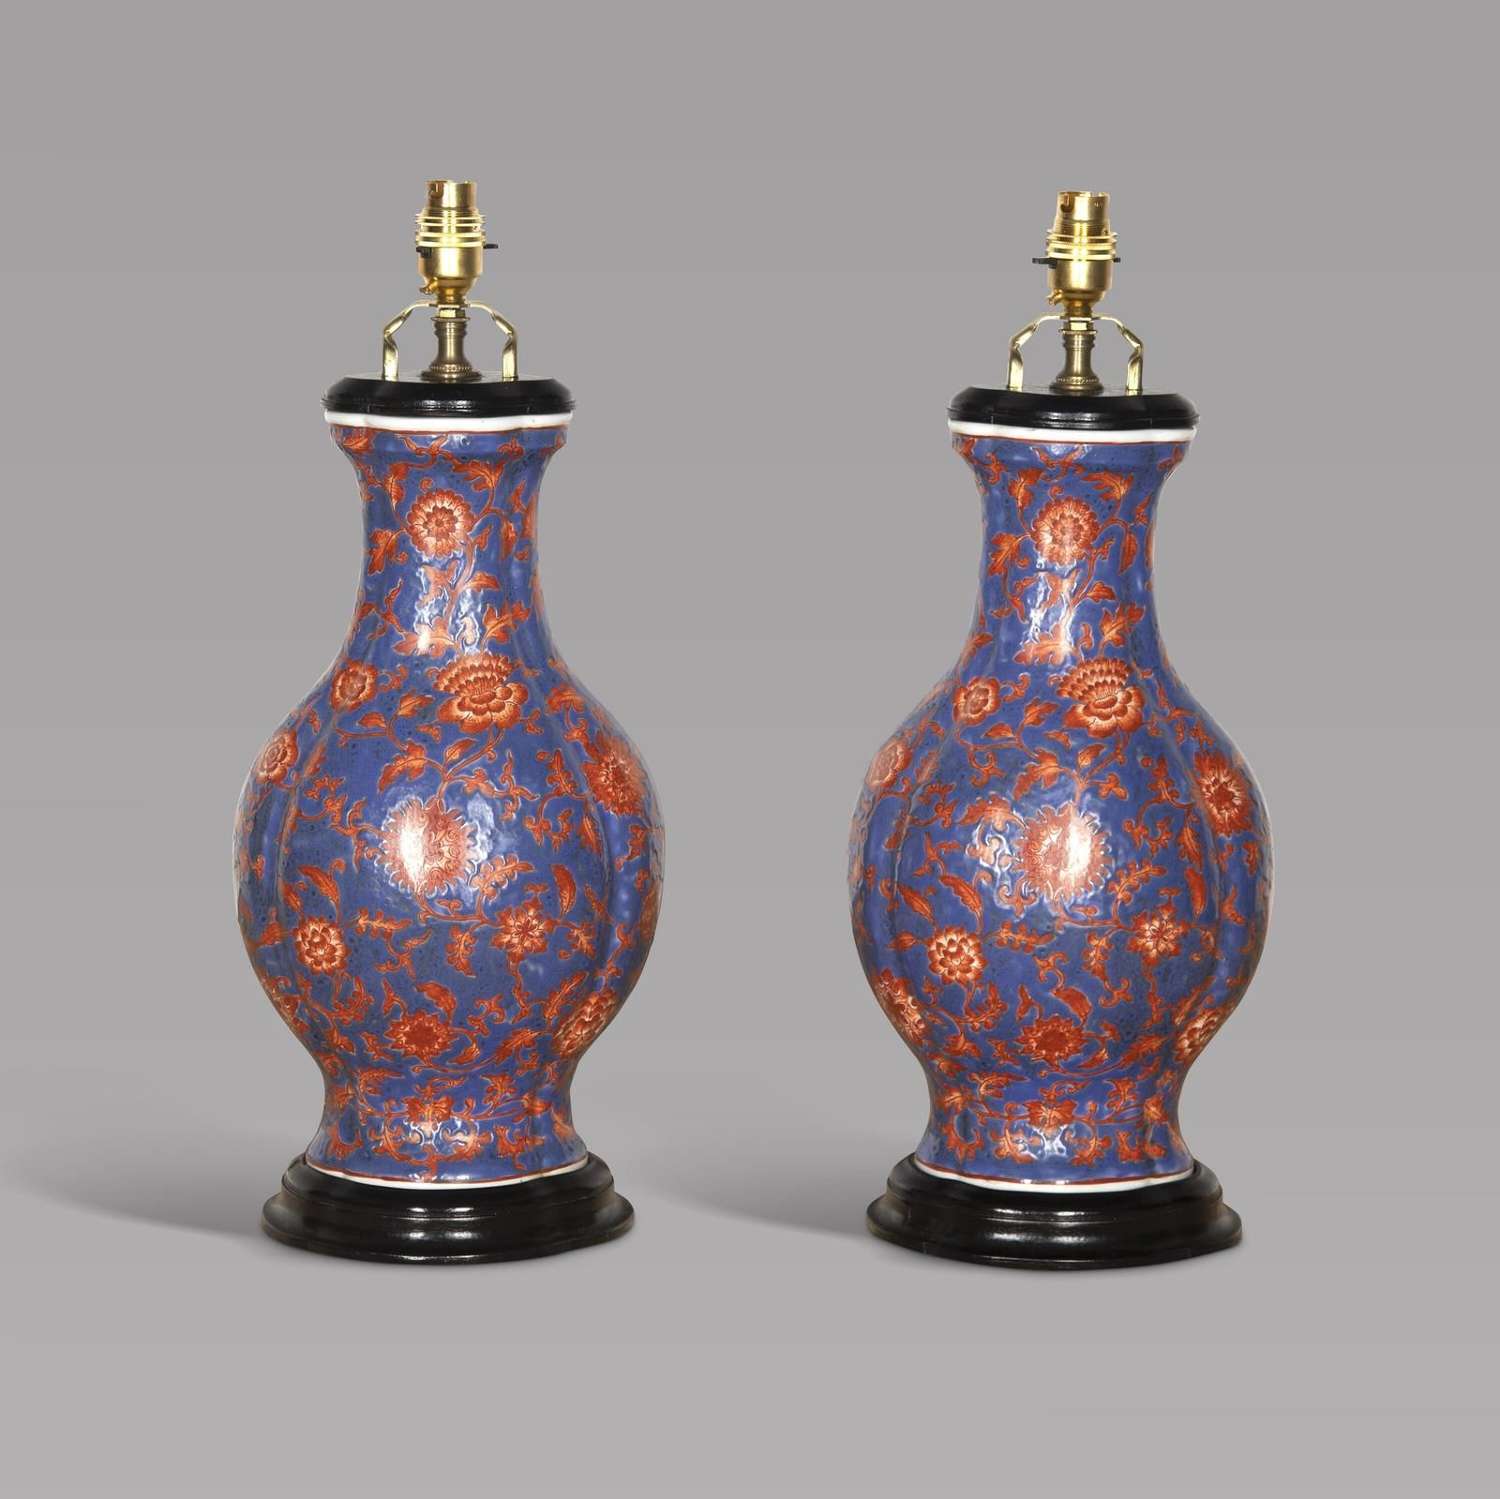 Pair of 19th Century Chinese Vase Lamps